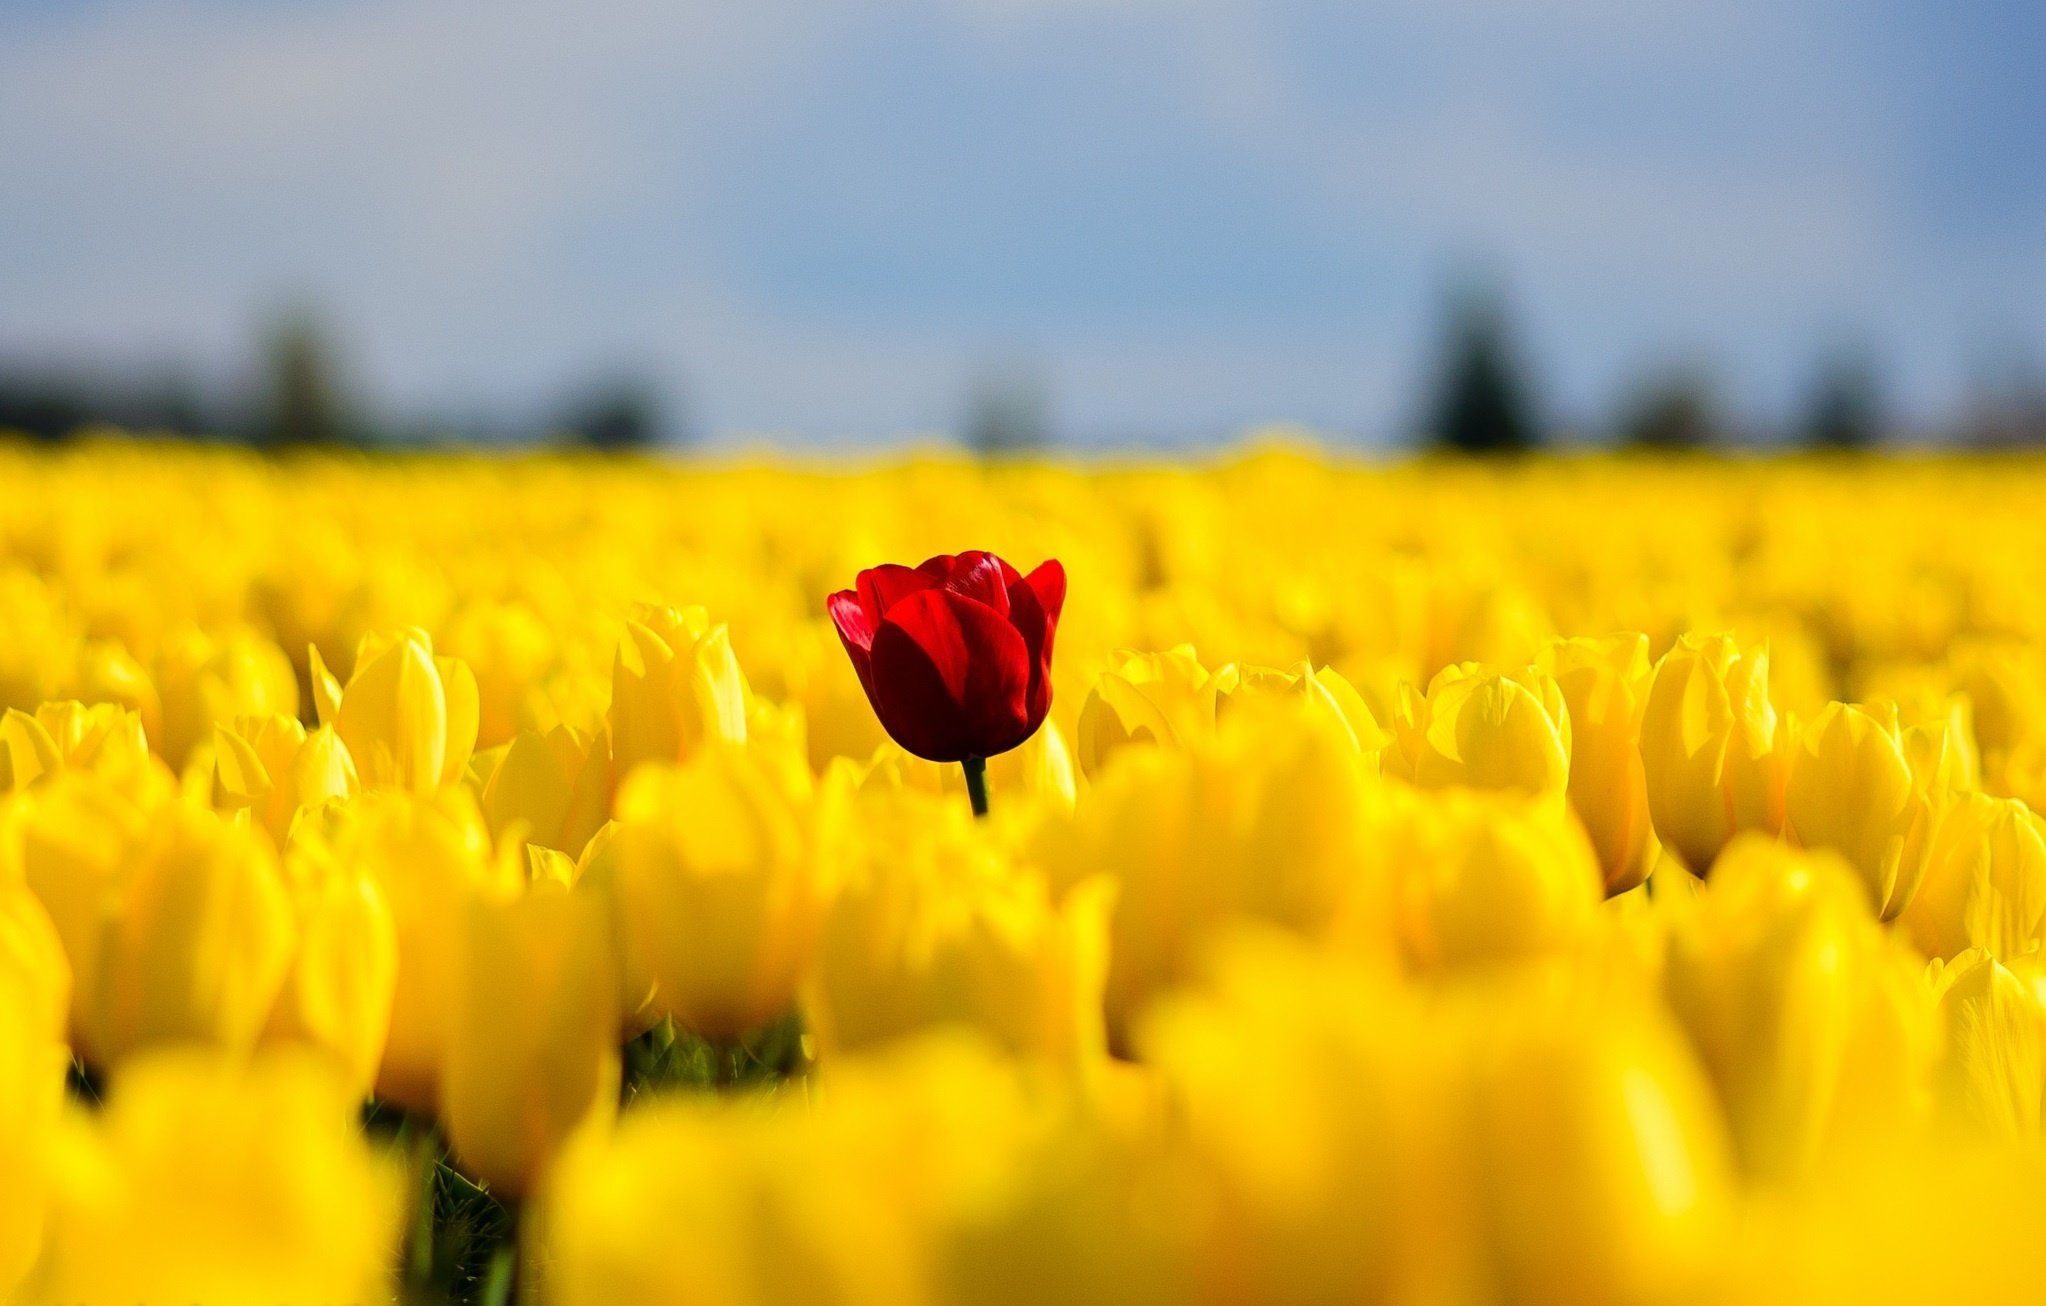 Tulips flowers field yellow red single nature spring wallpaper